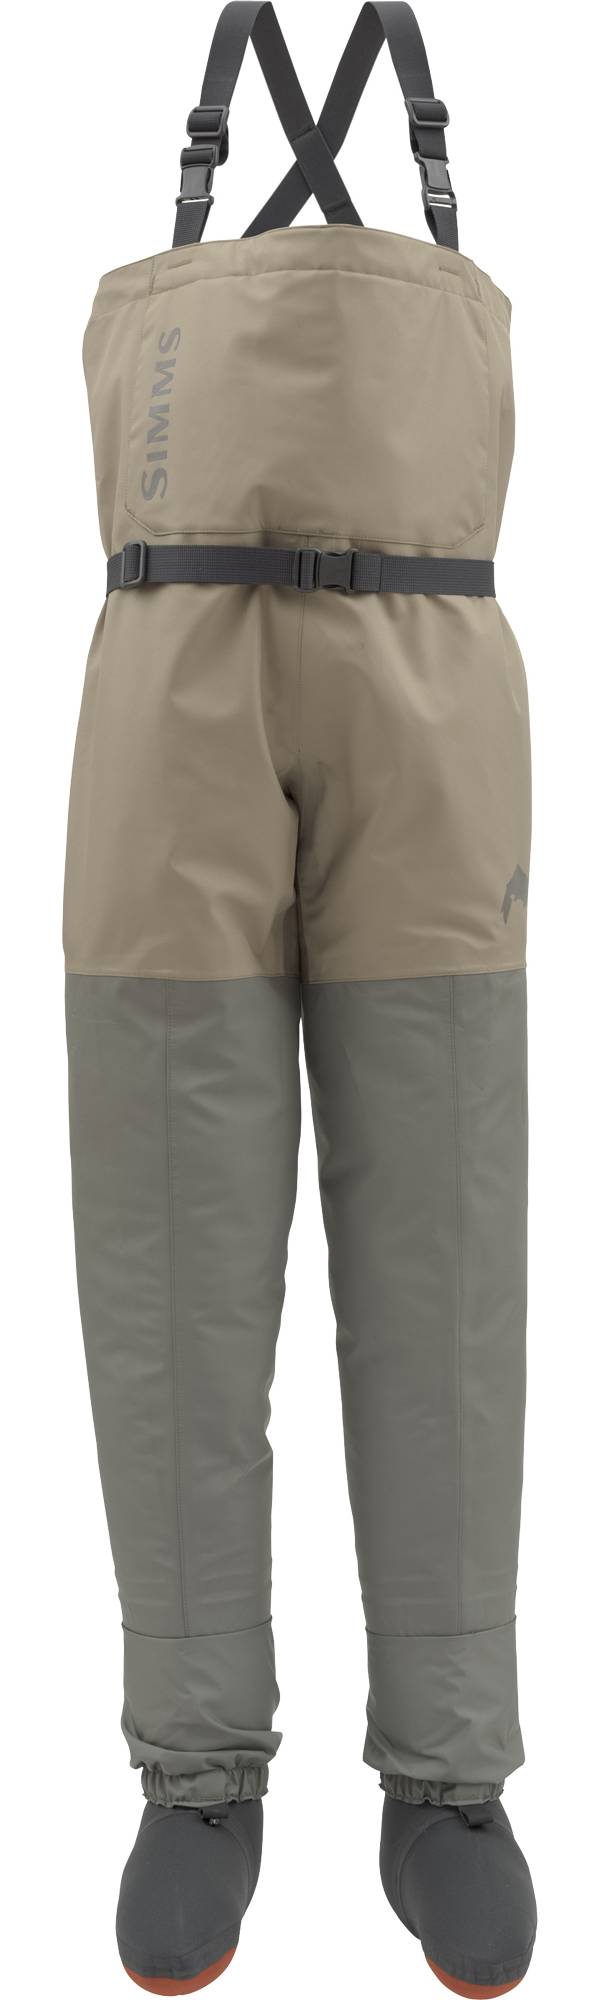 Simms Youth Tributary Chest Waders product image